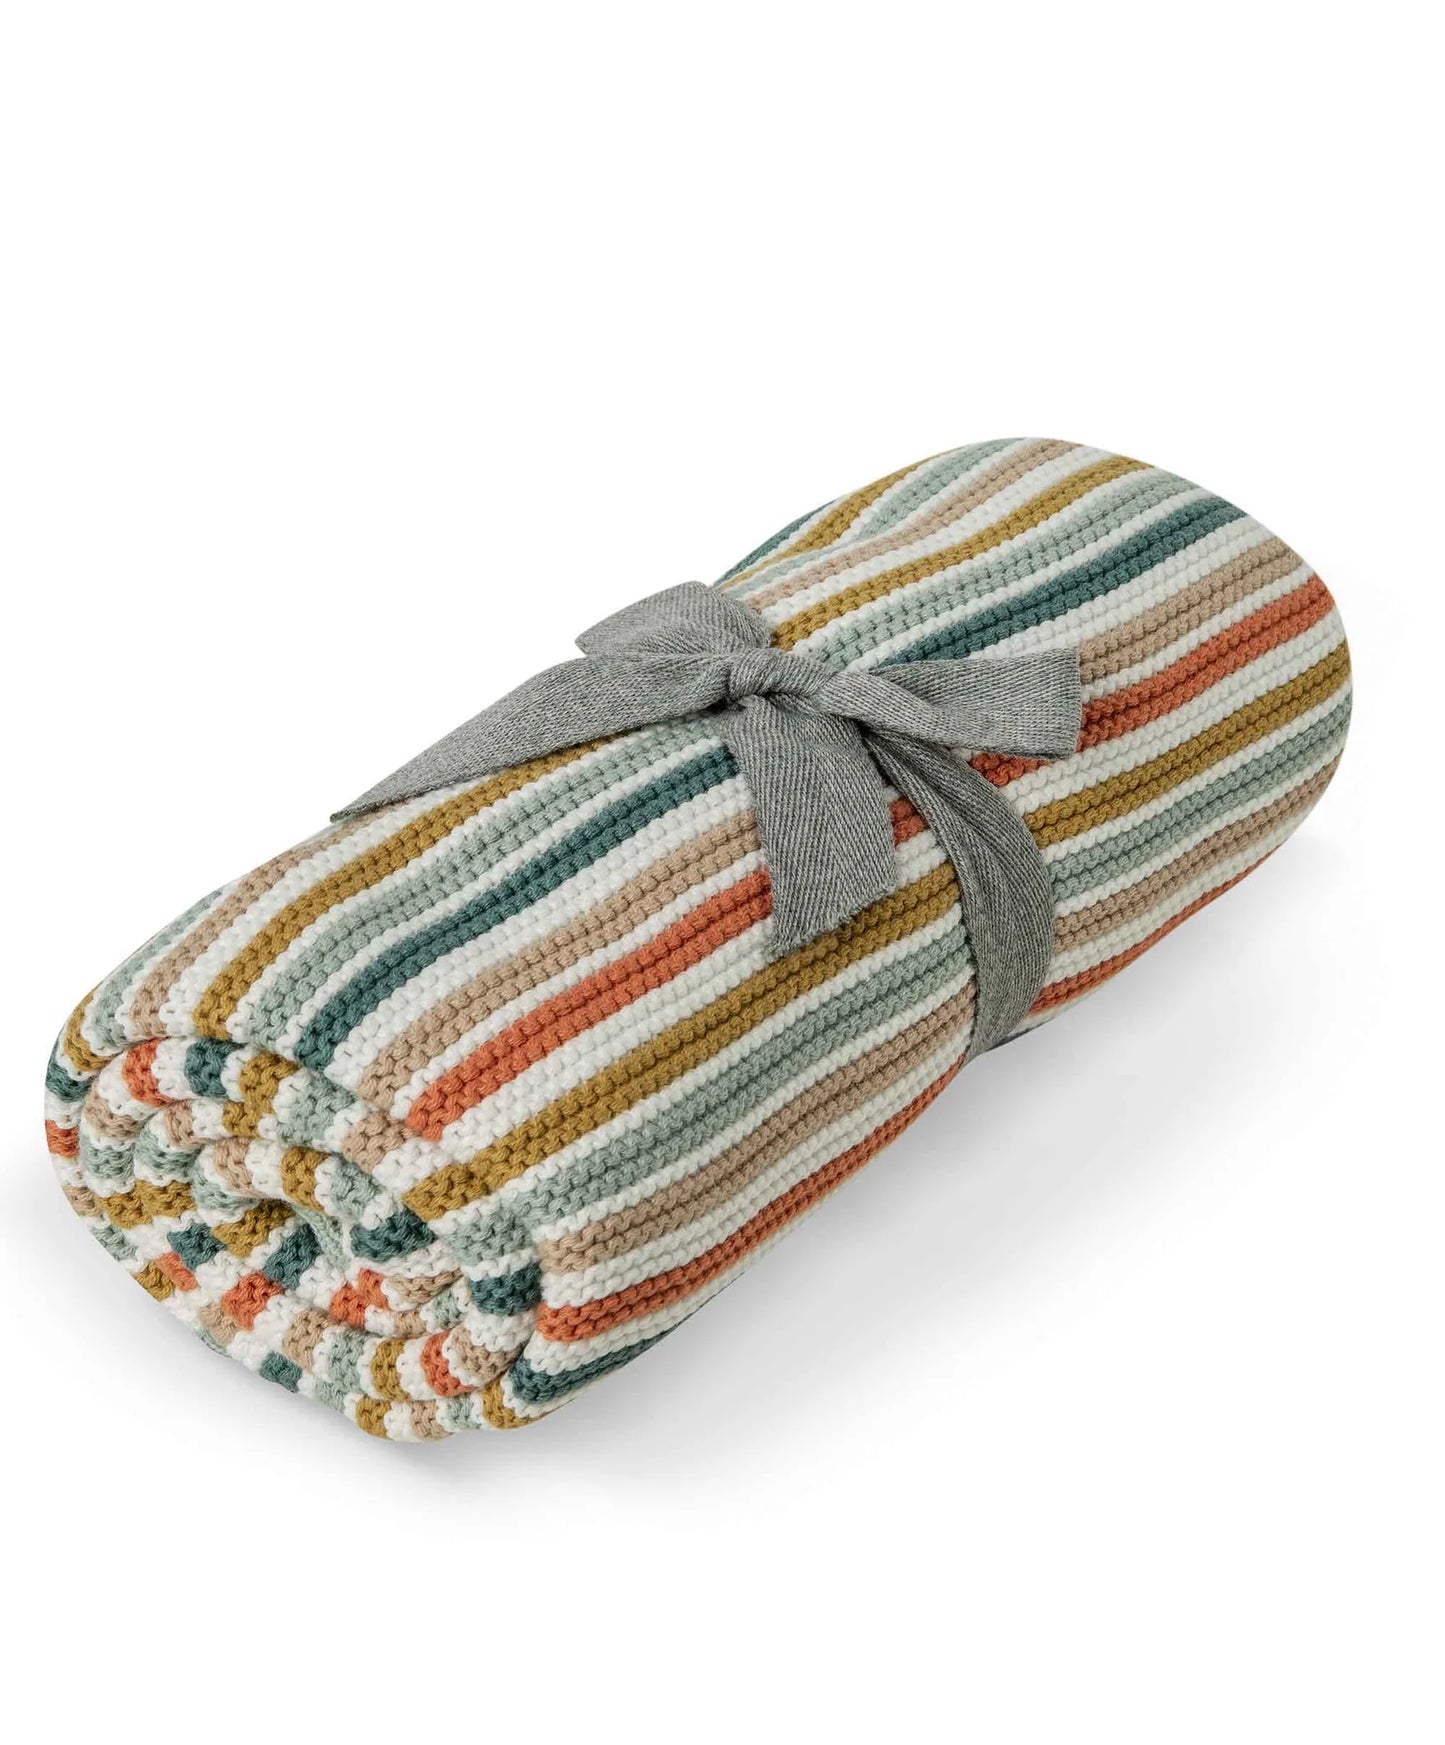 Striped cotton baby blanket in neutral colours, sage stone, ochre, cream and peppermint green.